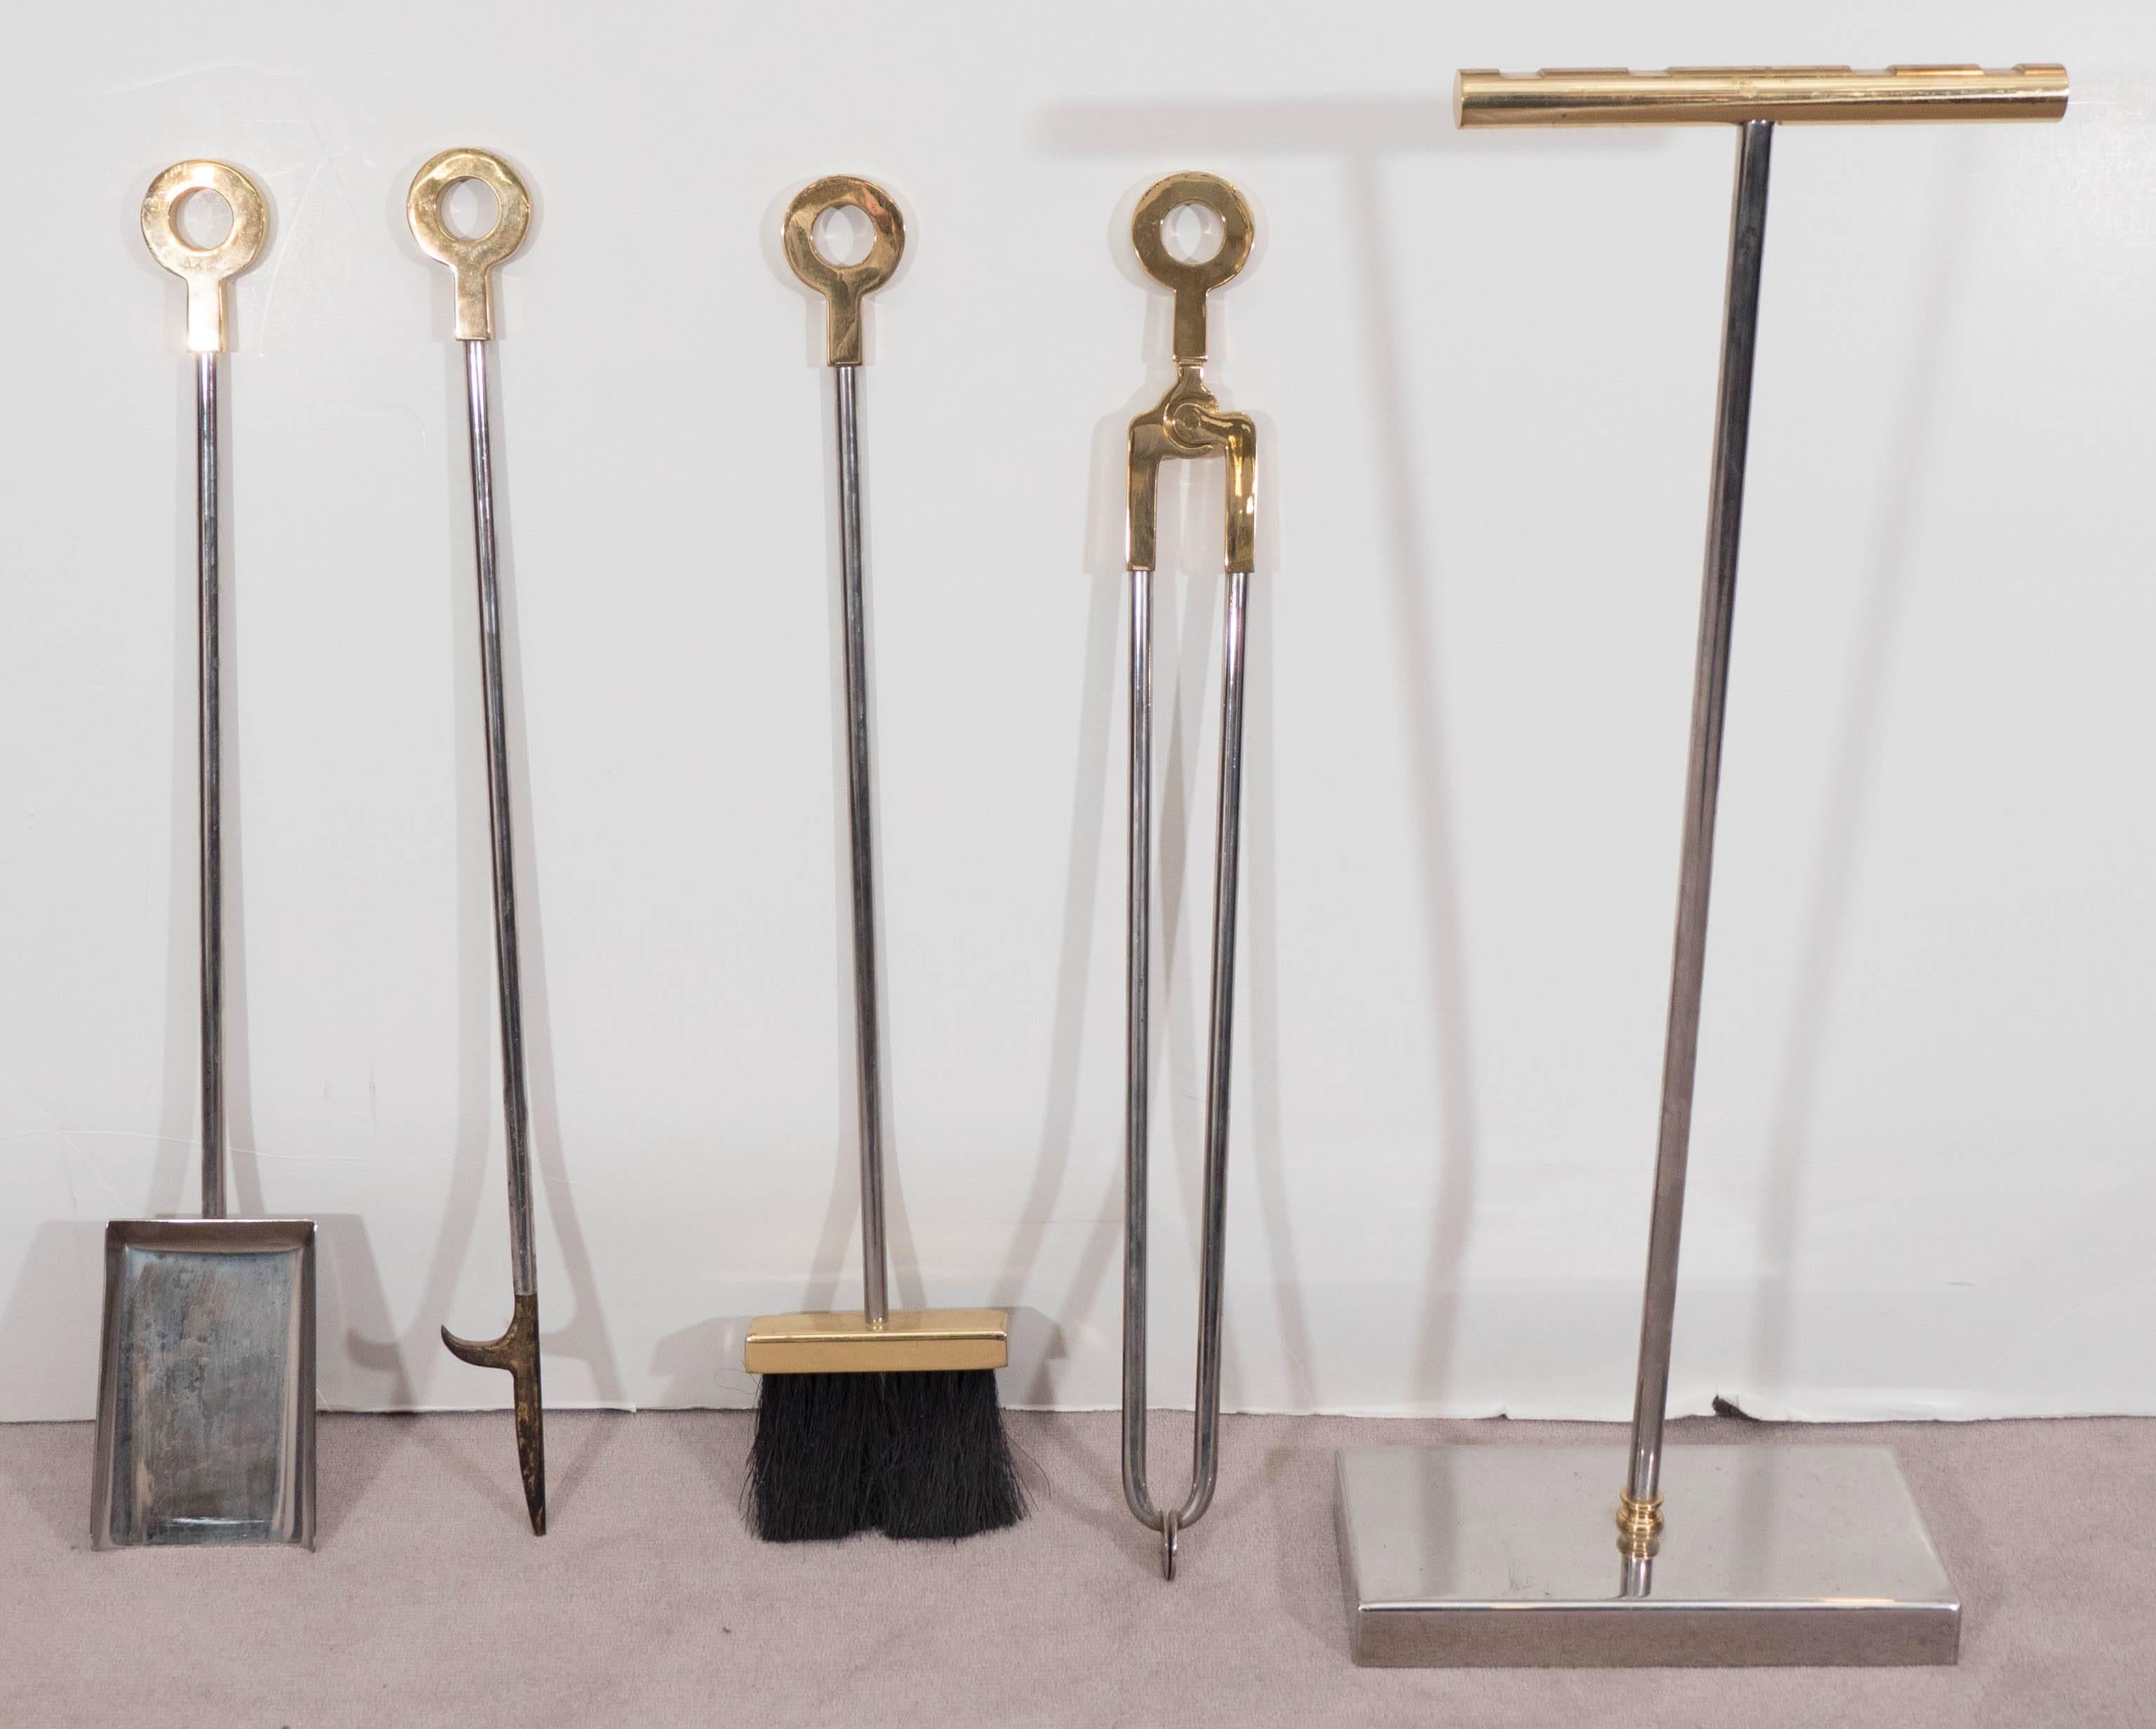 Late 20th Century Set of Danny Alessandro Fireplace Tools in Brass and Nickel